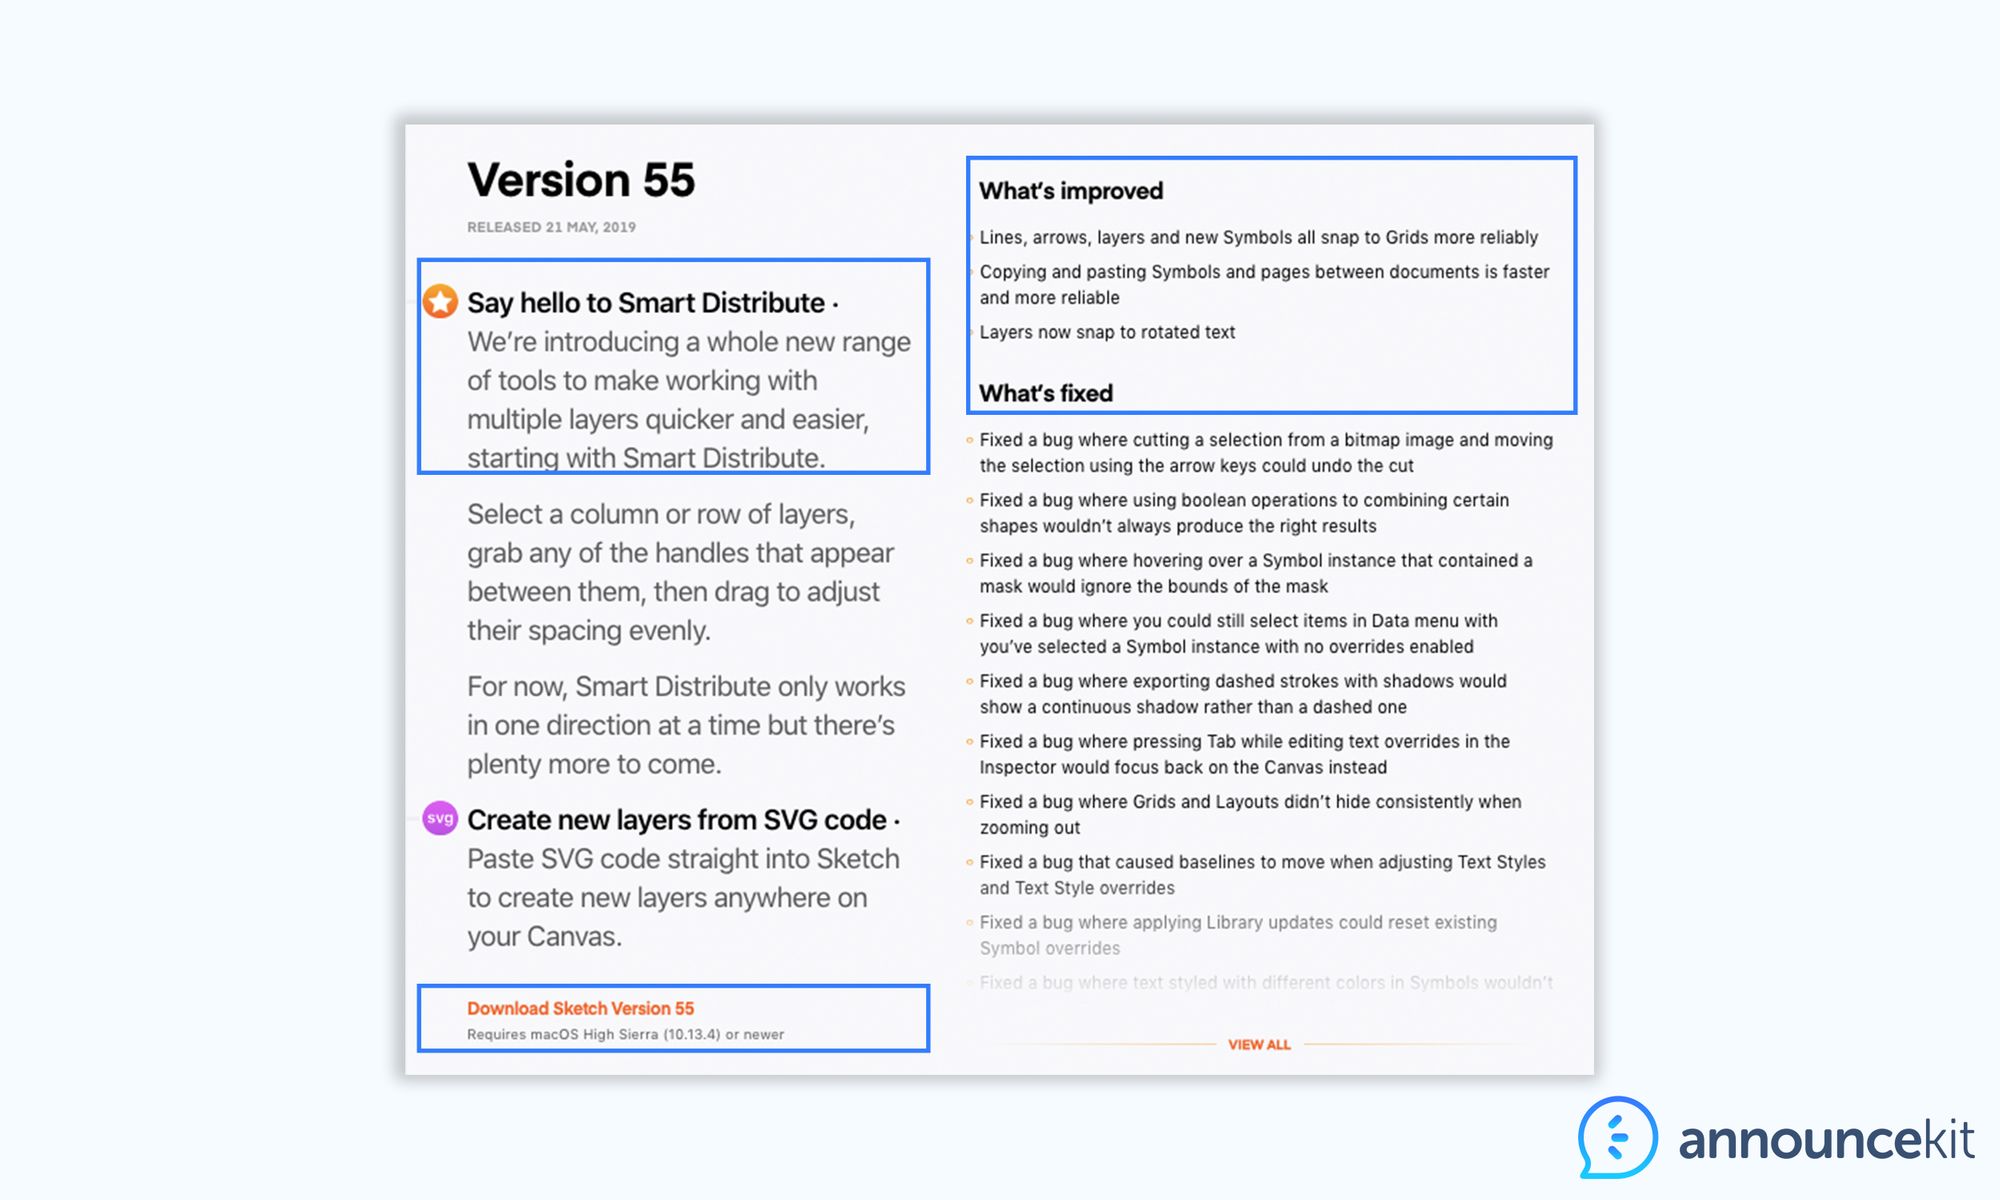 Sketch's Release notes exmaple & release notes template